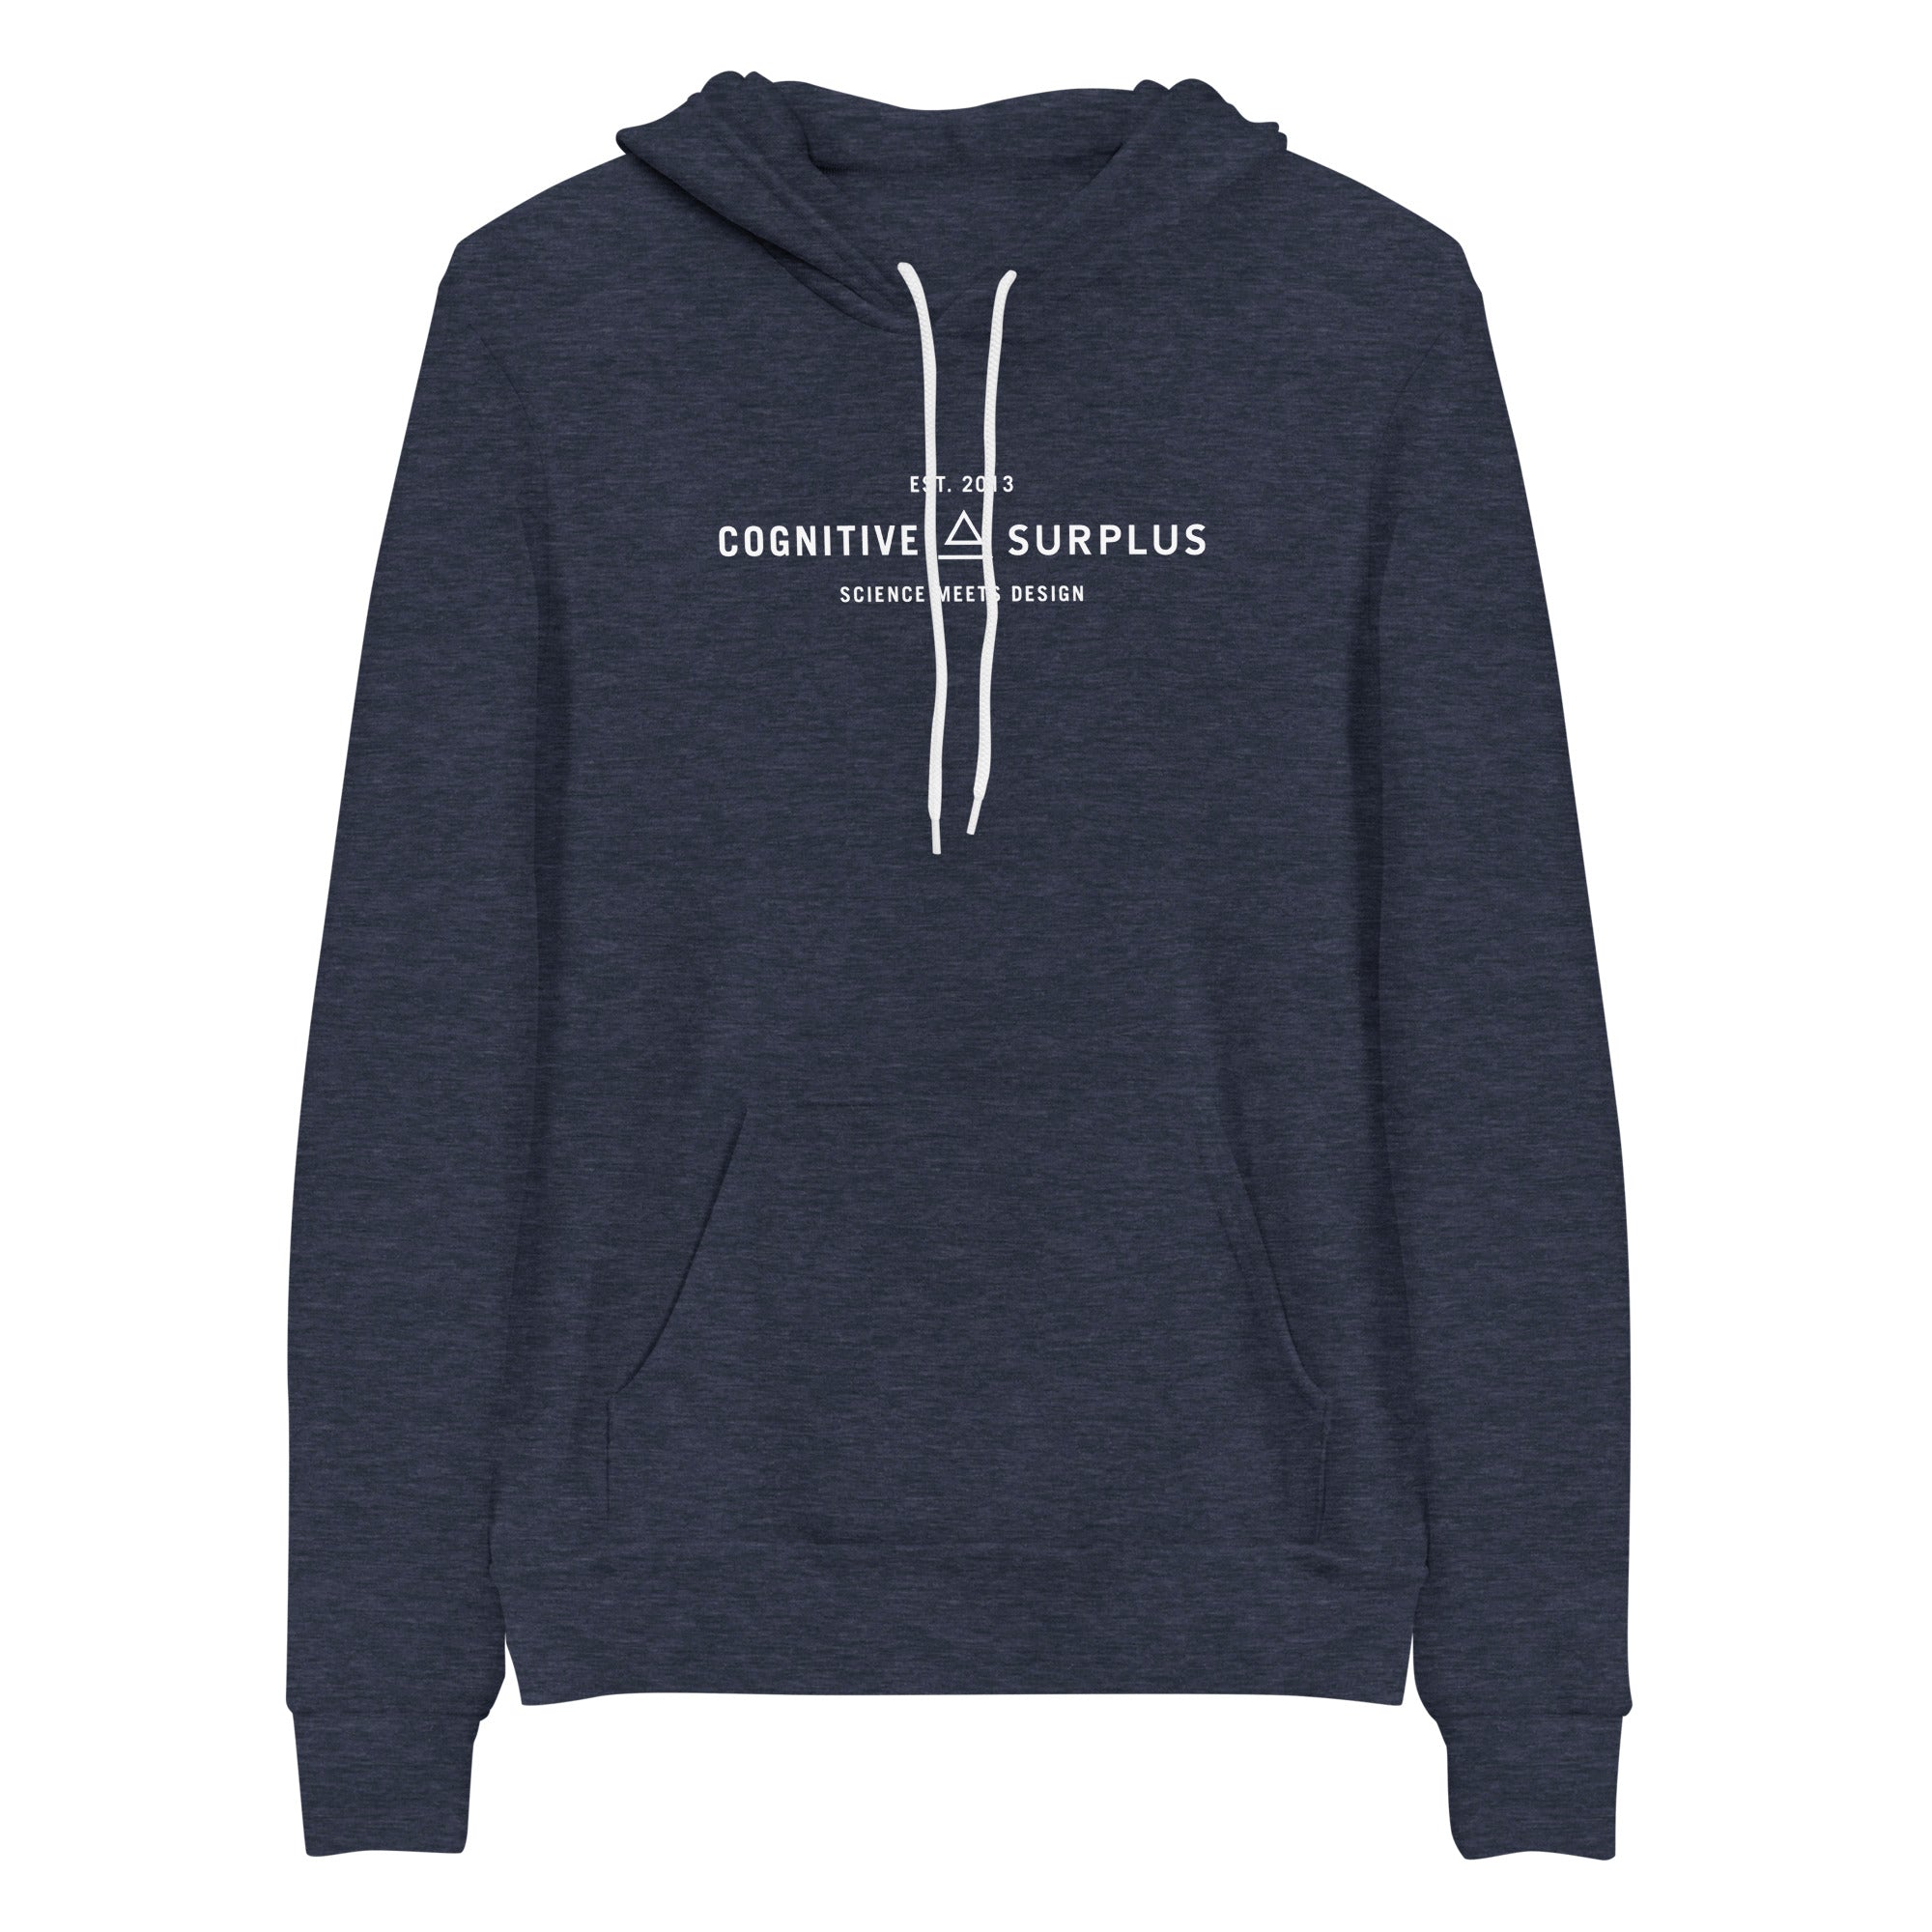 unisex-pullover-hoodie-heather-navy-front-656f714a77b6f.jpg